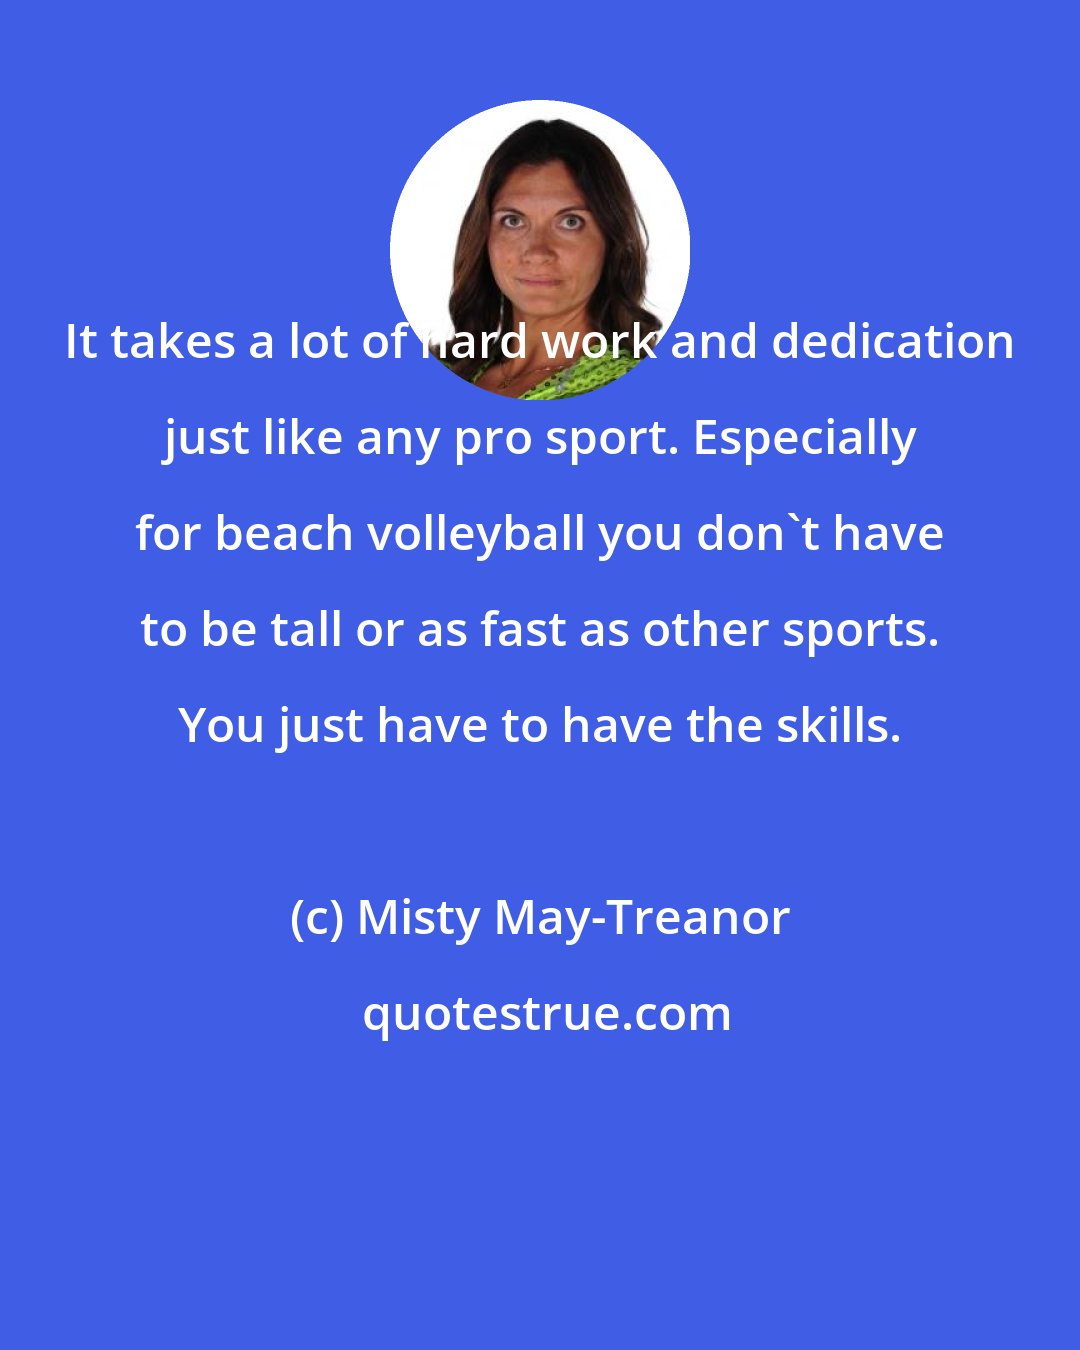 Misty May-Treanor: It takes a lot of hard work and dedication just like any pro sport. Especially for beach volleyball you don't have to be tall or as fast as other sports. You just have to have the skills.